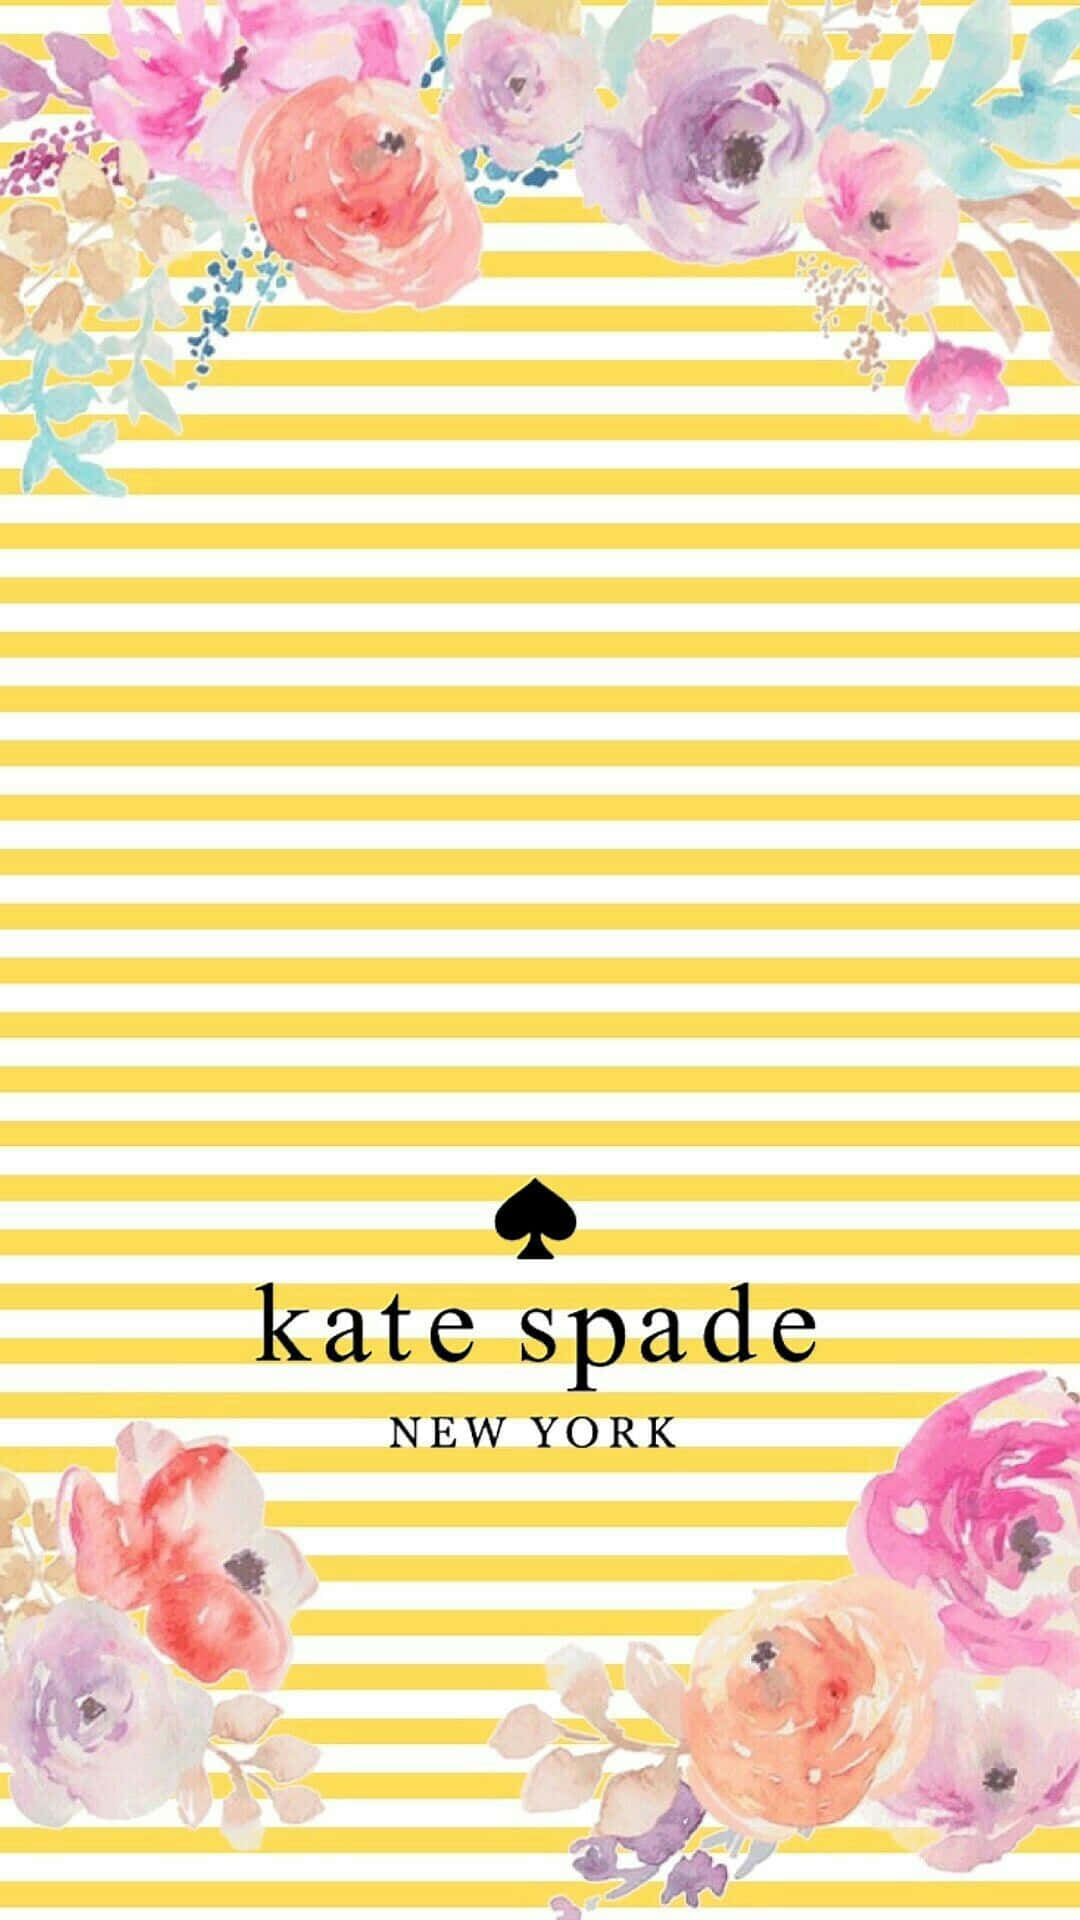 "Live Colorfully with Kate Spade!"